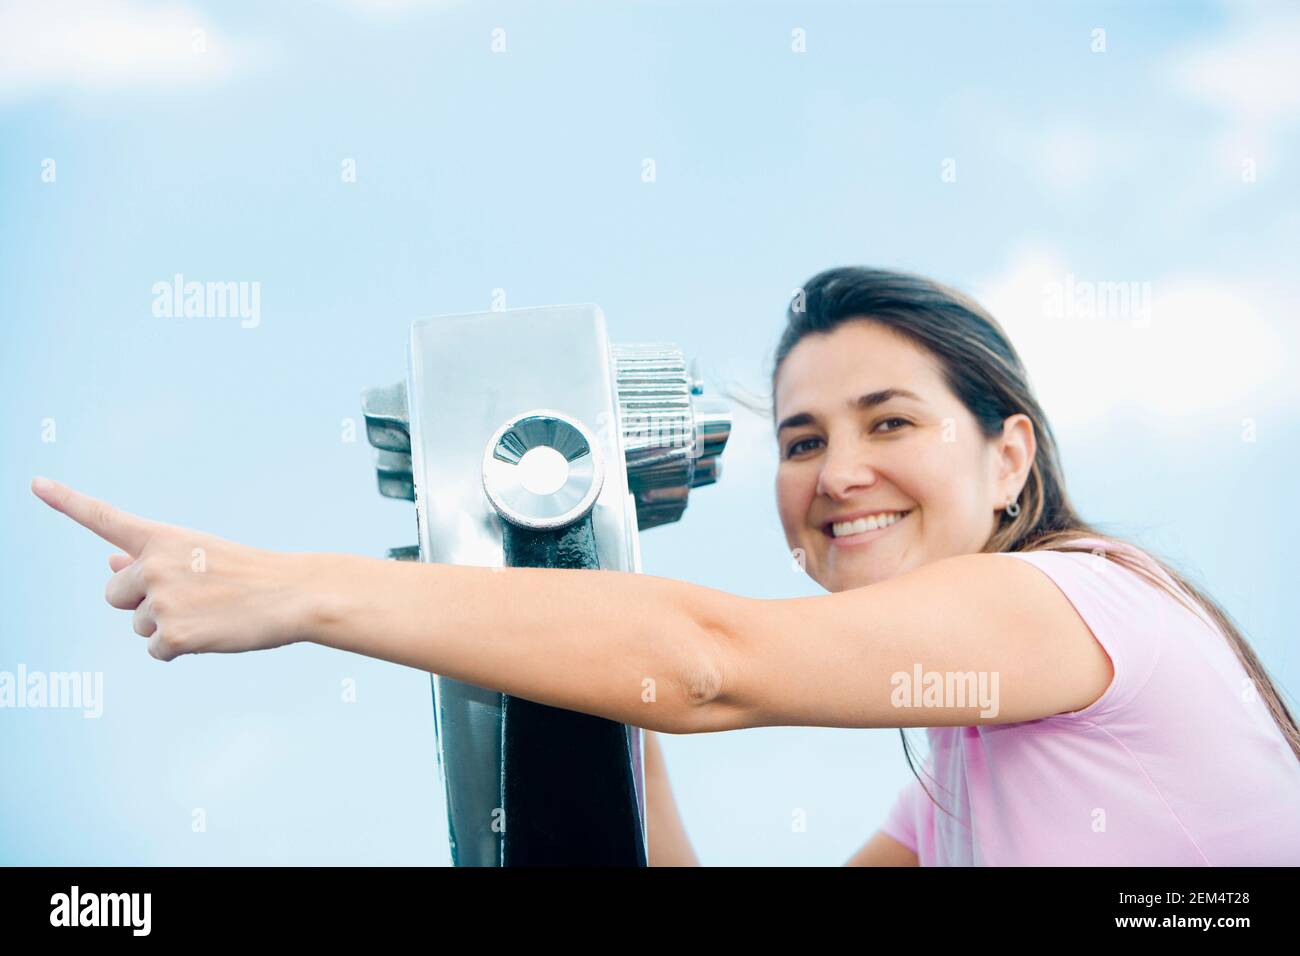 Portrait of a mid adult woman pointing forward near a pair of coin-operated binoculars Stock Photo